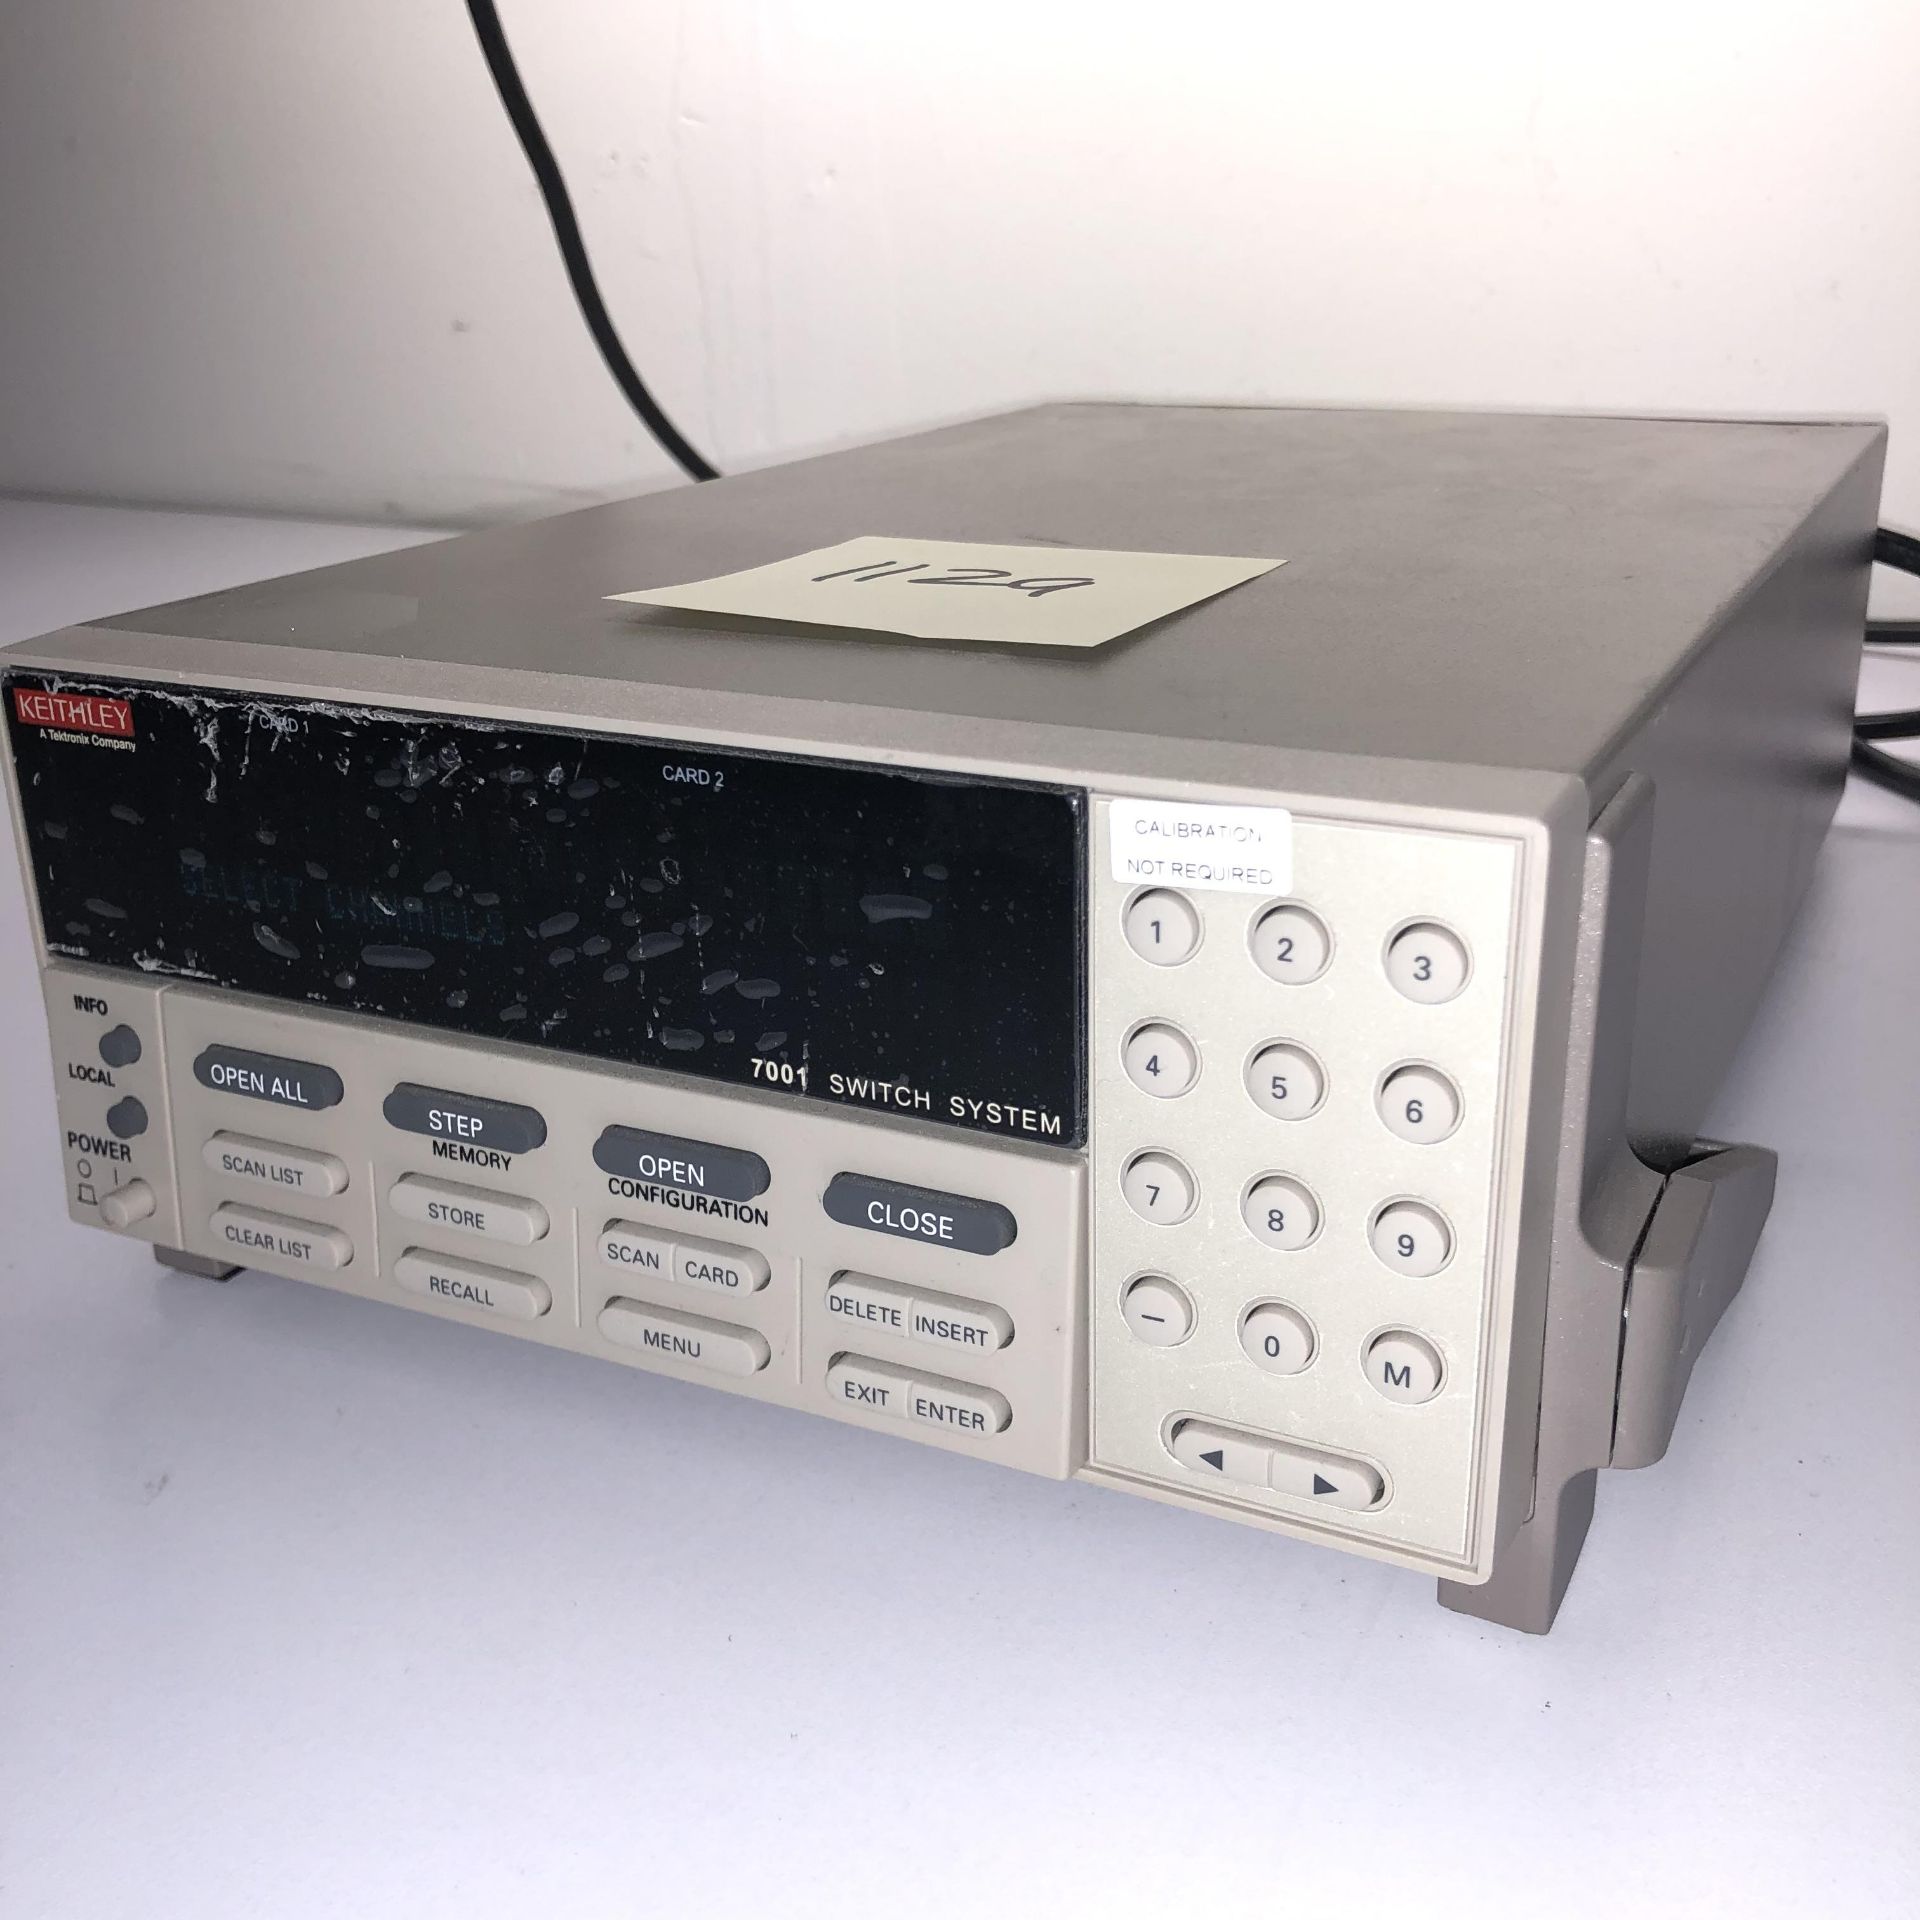 KEITHLEY 7001 SWITCH SYSTEM   1218 Alderwood Ave Sunnyvale, California - Image 3 of 6